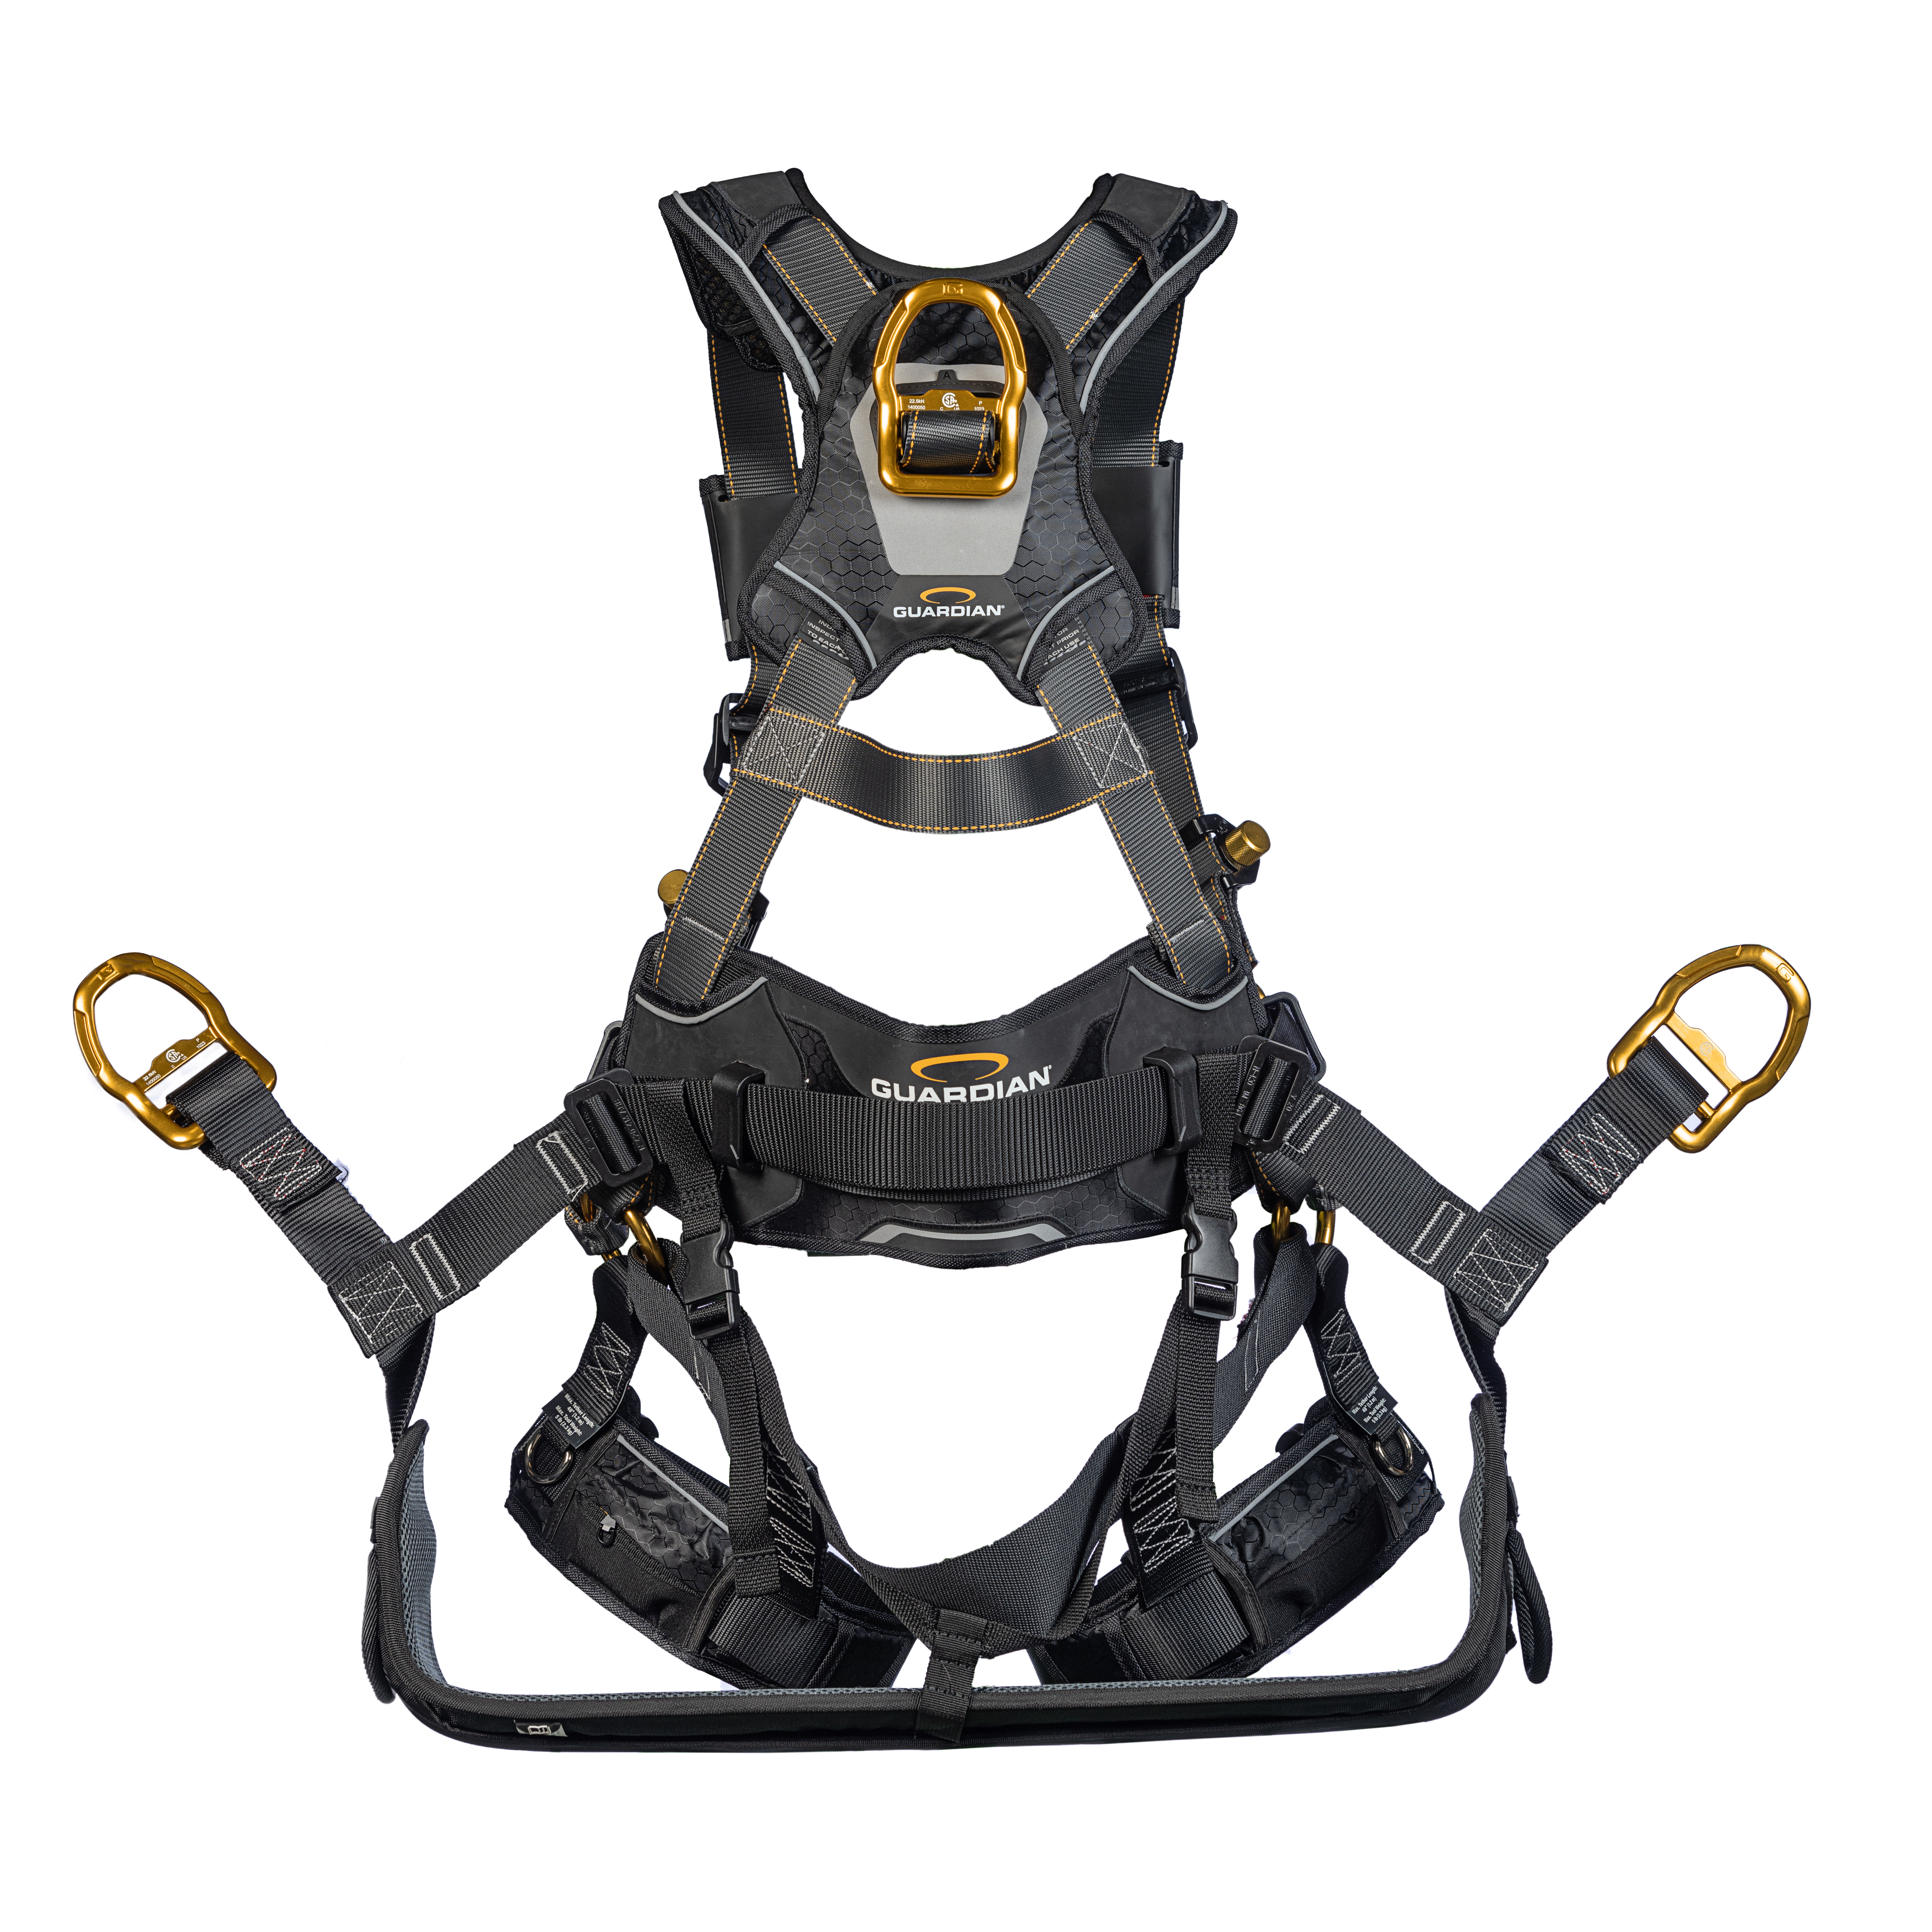 Guardian B7-Comfort Tower Climbing Harness from Columbia Safety